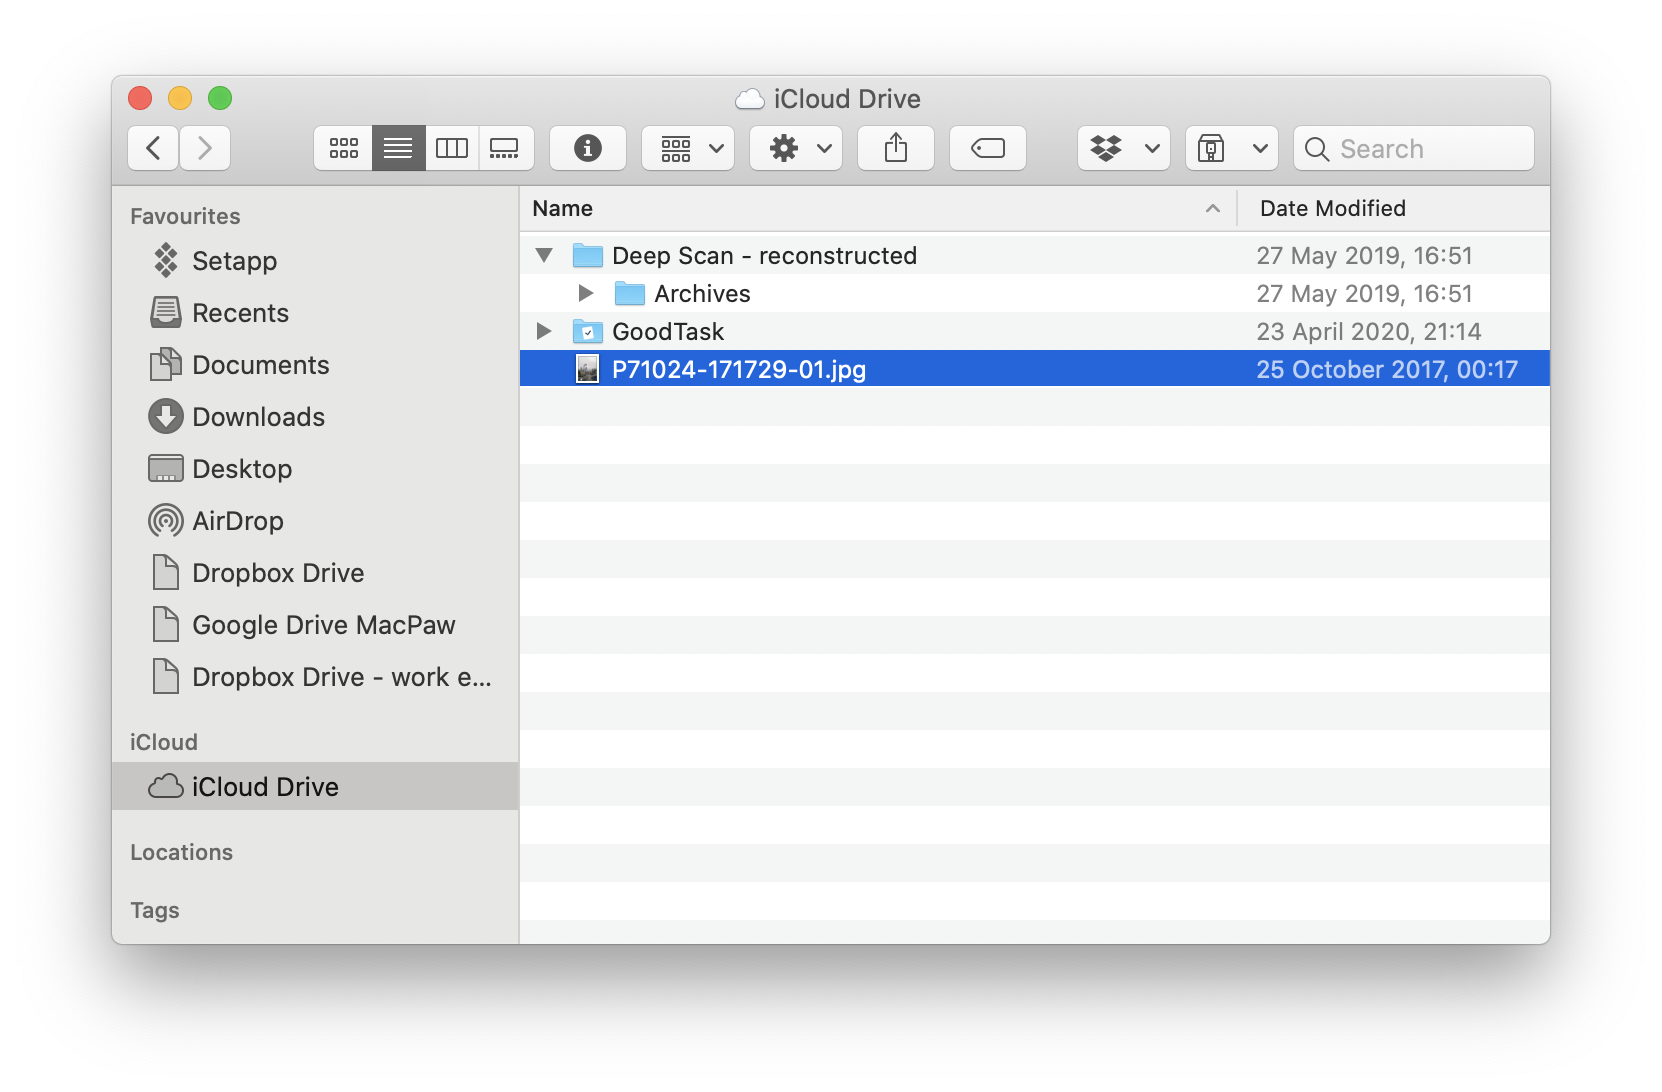 Connect your iCloud drive to Finder